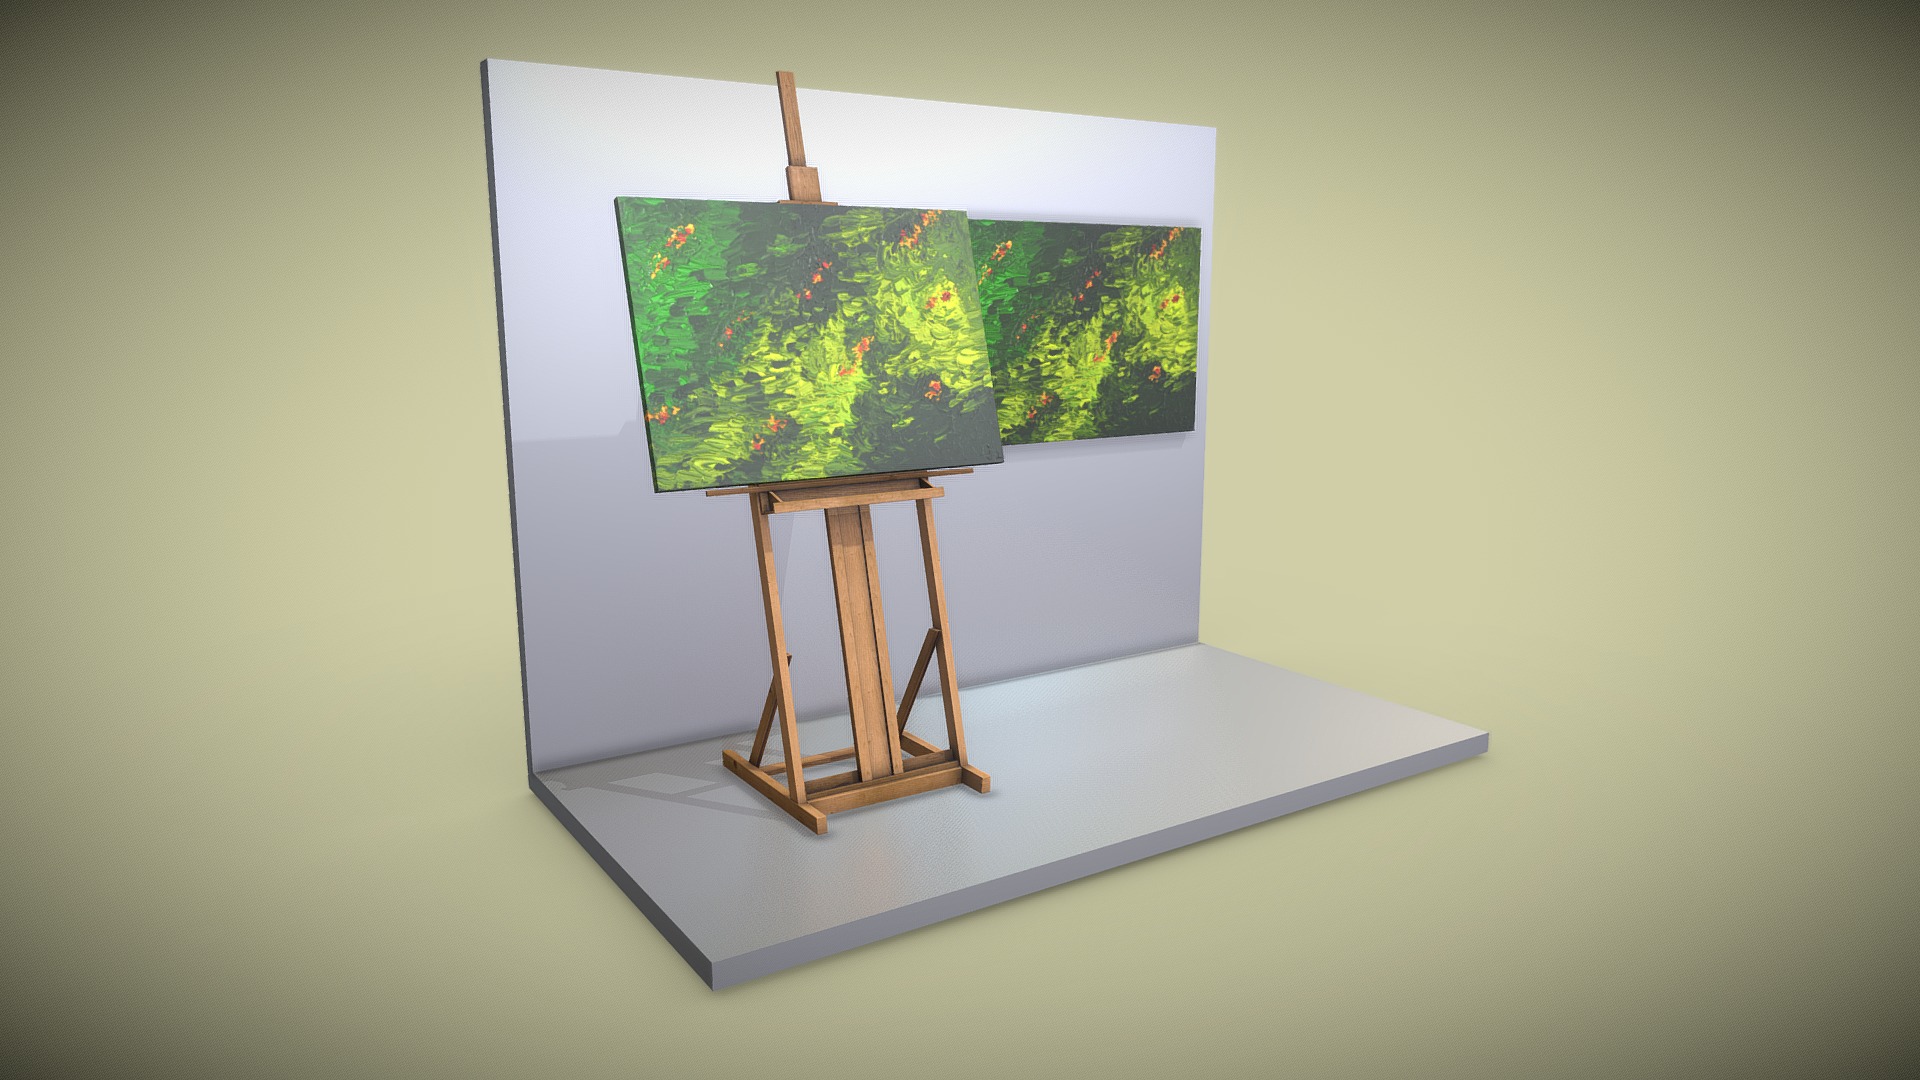 3D model Oil Painting – Green With Red And Golden Hidings - This is a 3D model of the Oil Painting - Green With Red And Golden Hidings. The 3D model is about a painting on a stand.